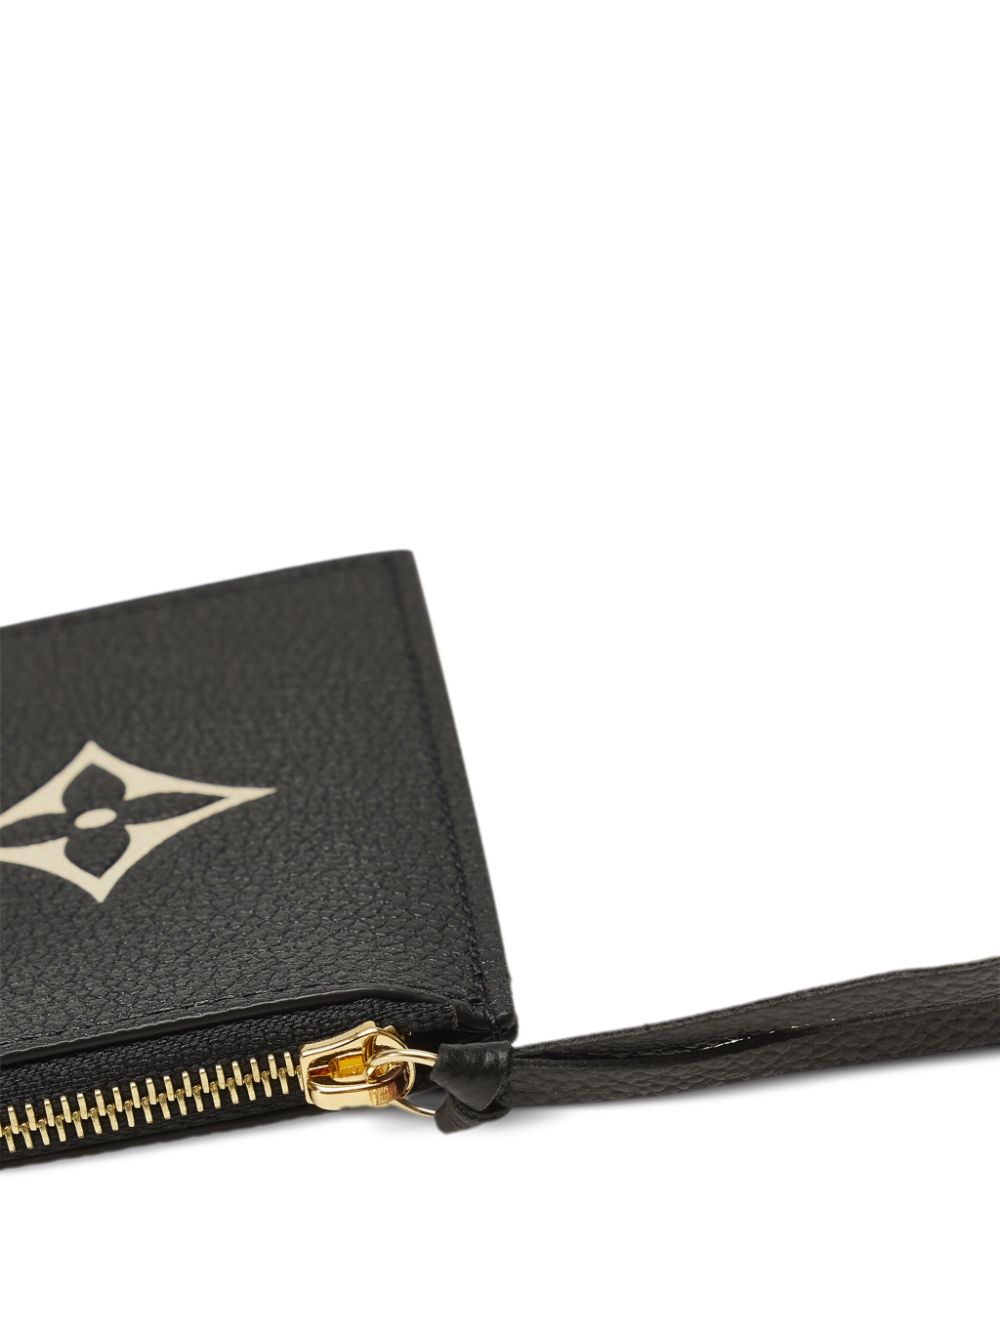 Louis Vuitton Felicie Pochette - Prestige Online Store - Luxury Items with  Exceptional Savings from the eShop